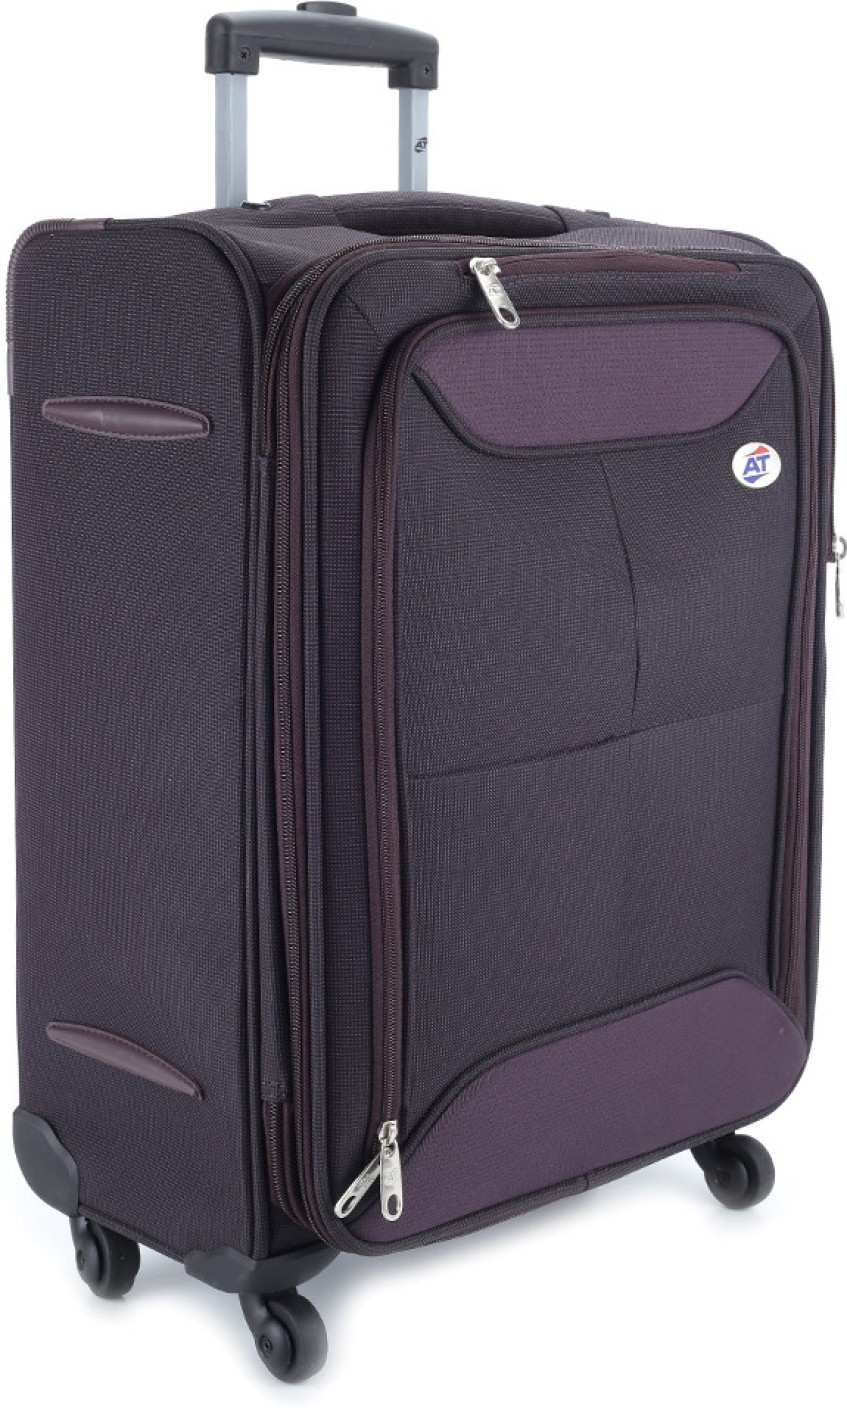 American Tourister Konnect Expandable Cabin Luggage 21 inch Purple 